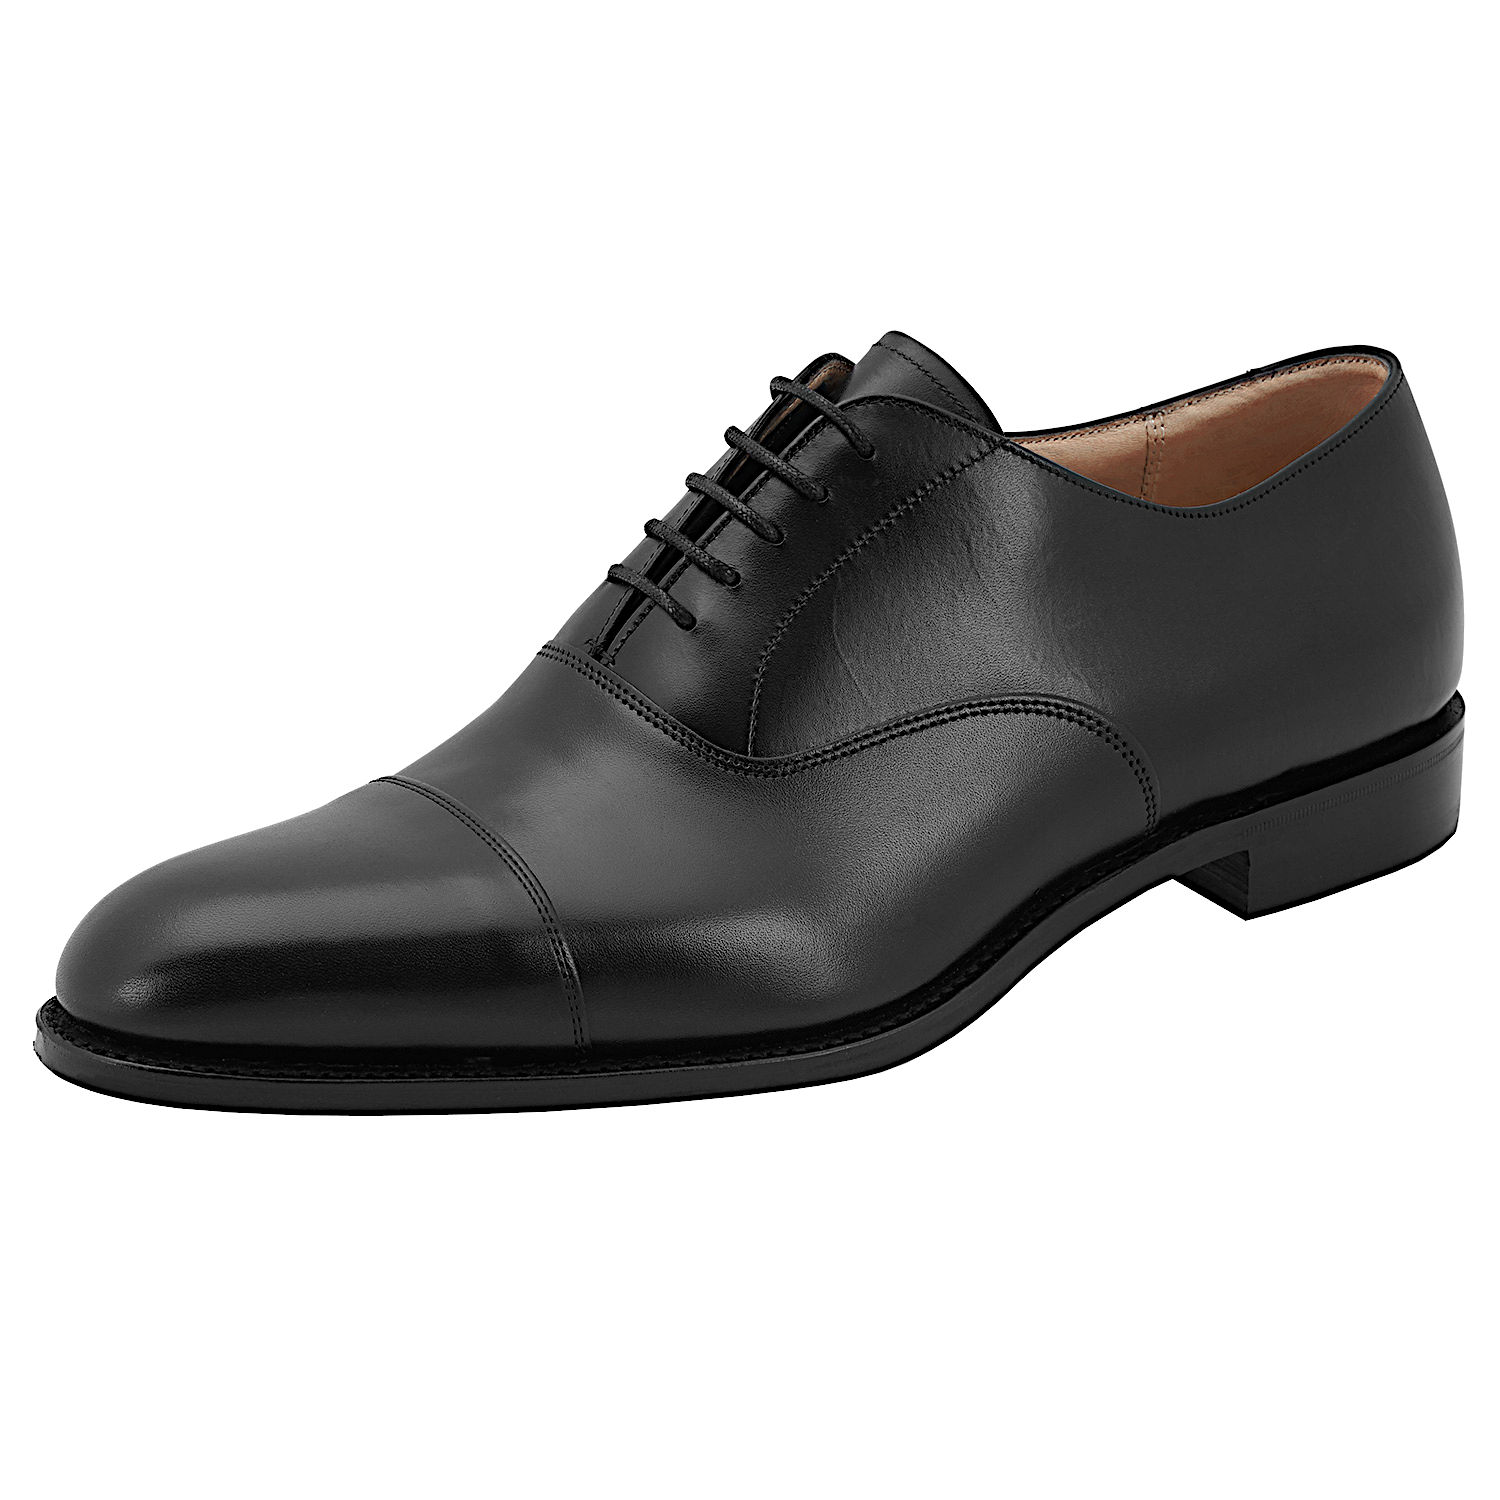 cheaney shoes sale uk